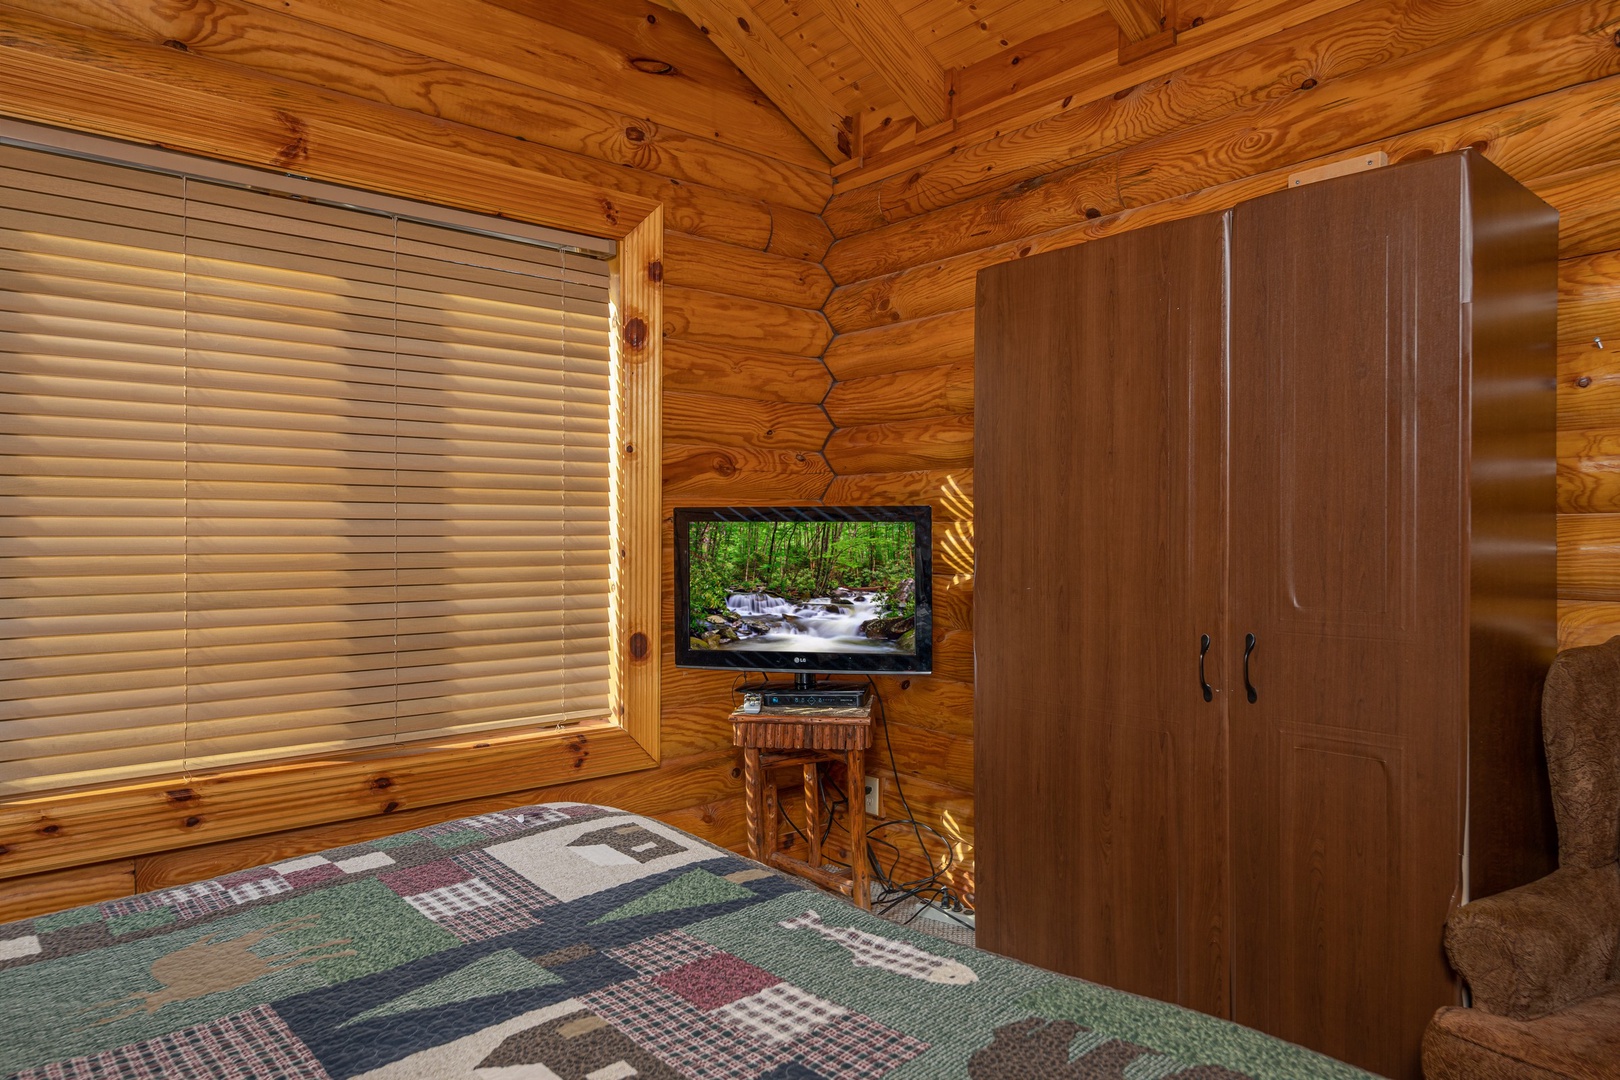 TV and armoire in a bedroom at Gone Fishin', a 2-bedroom cabin rental located in Pigeon Forge